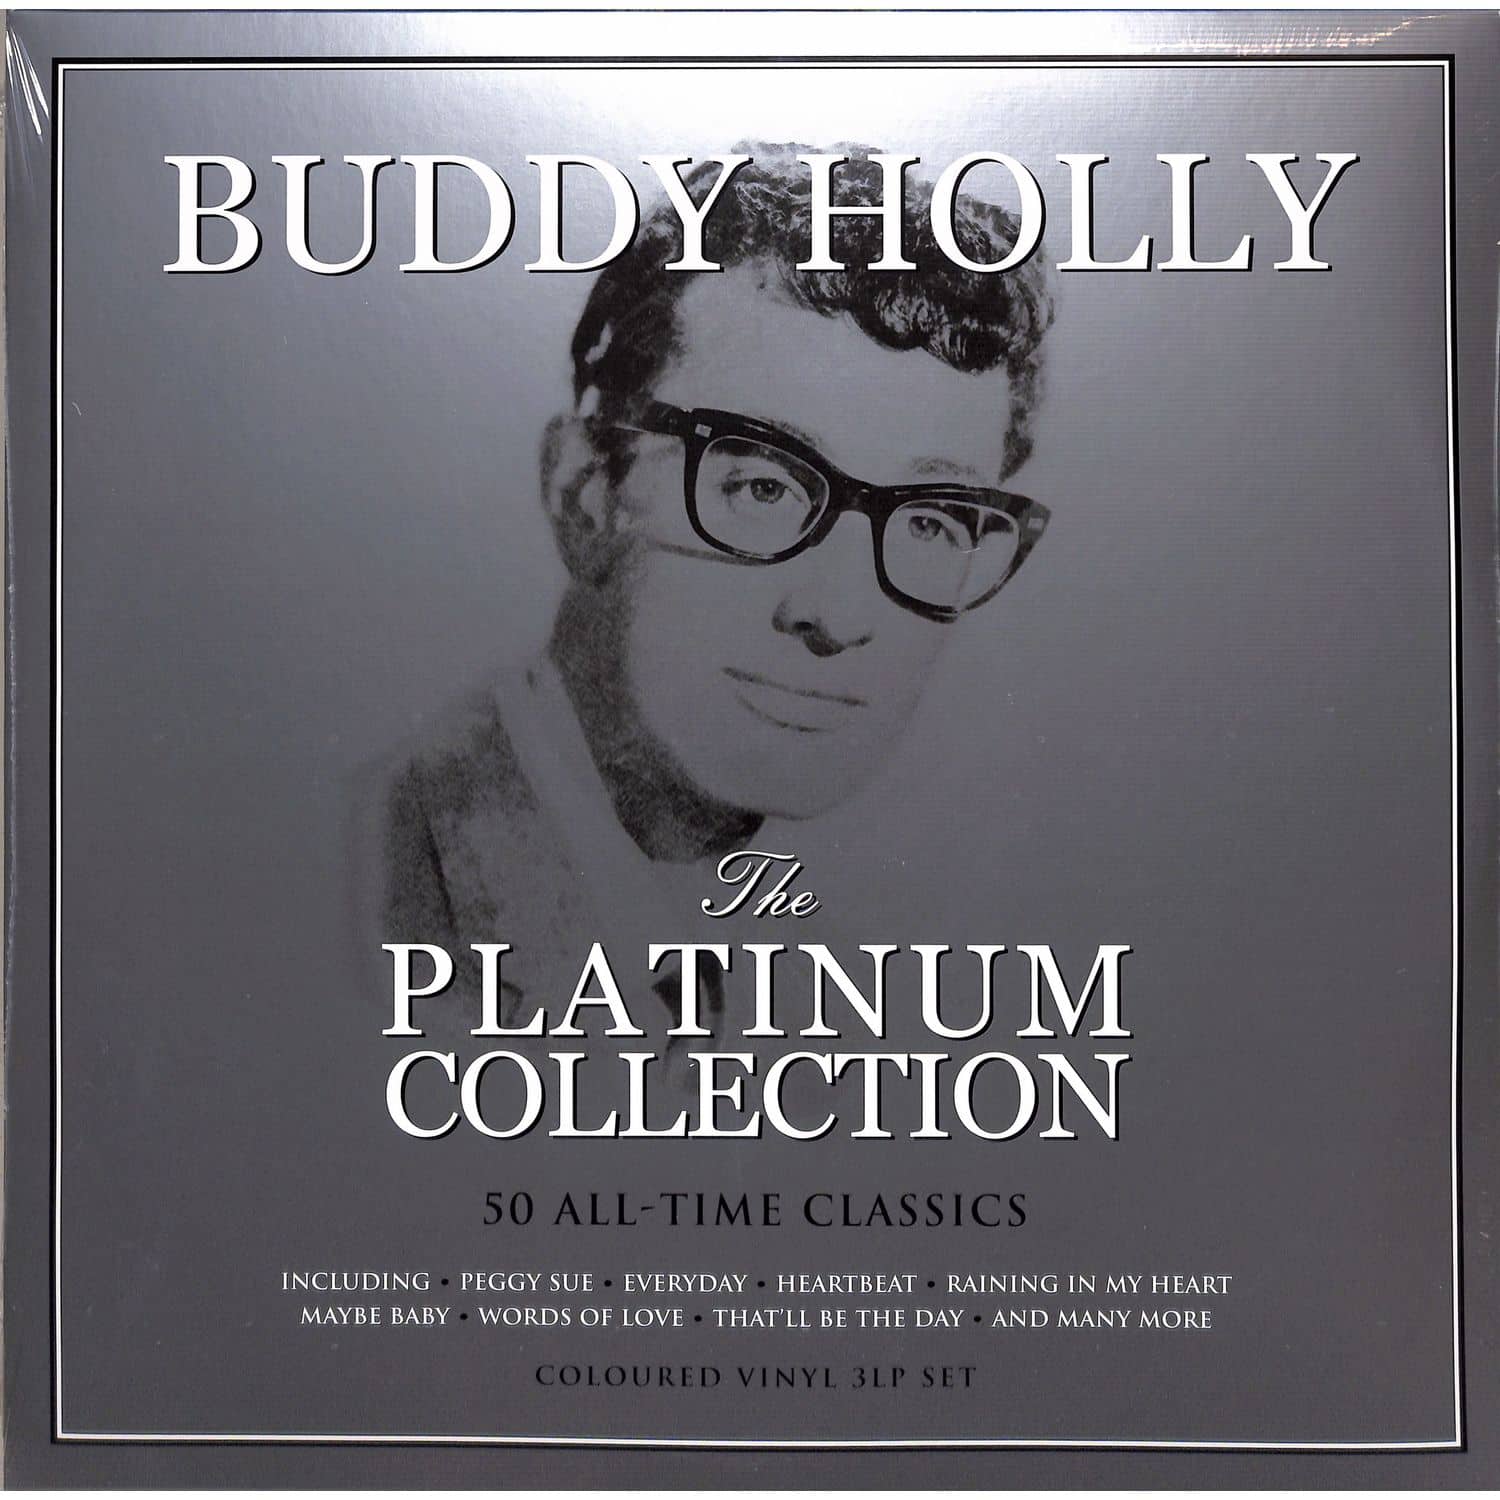 Buddy Holly - PLATINUM COLLECTION 